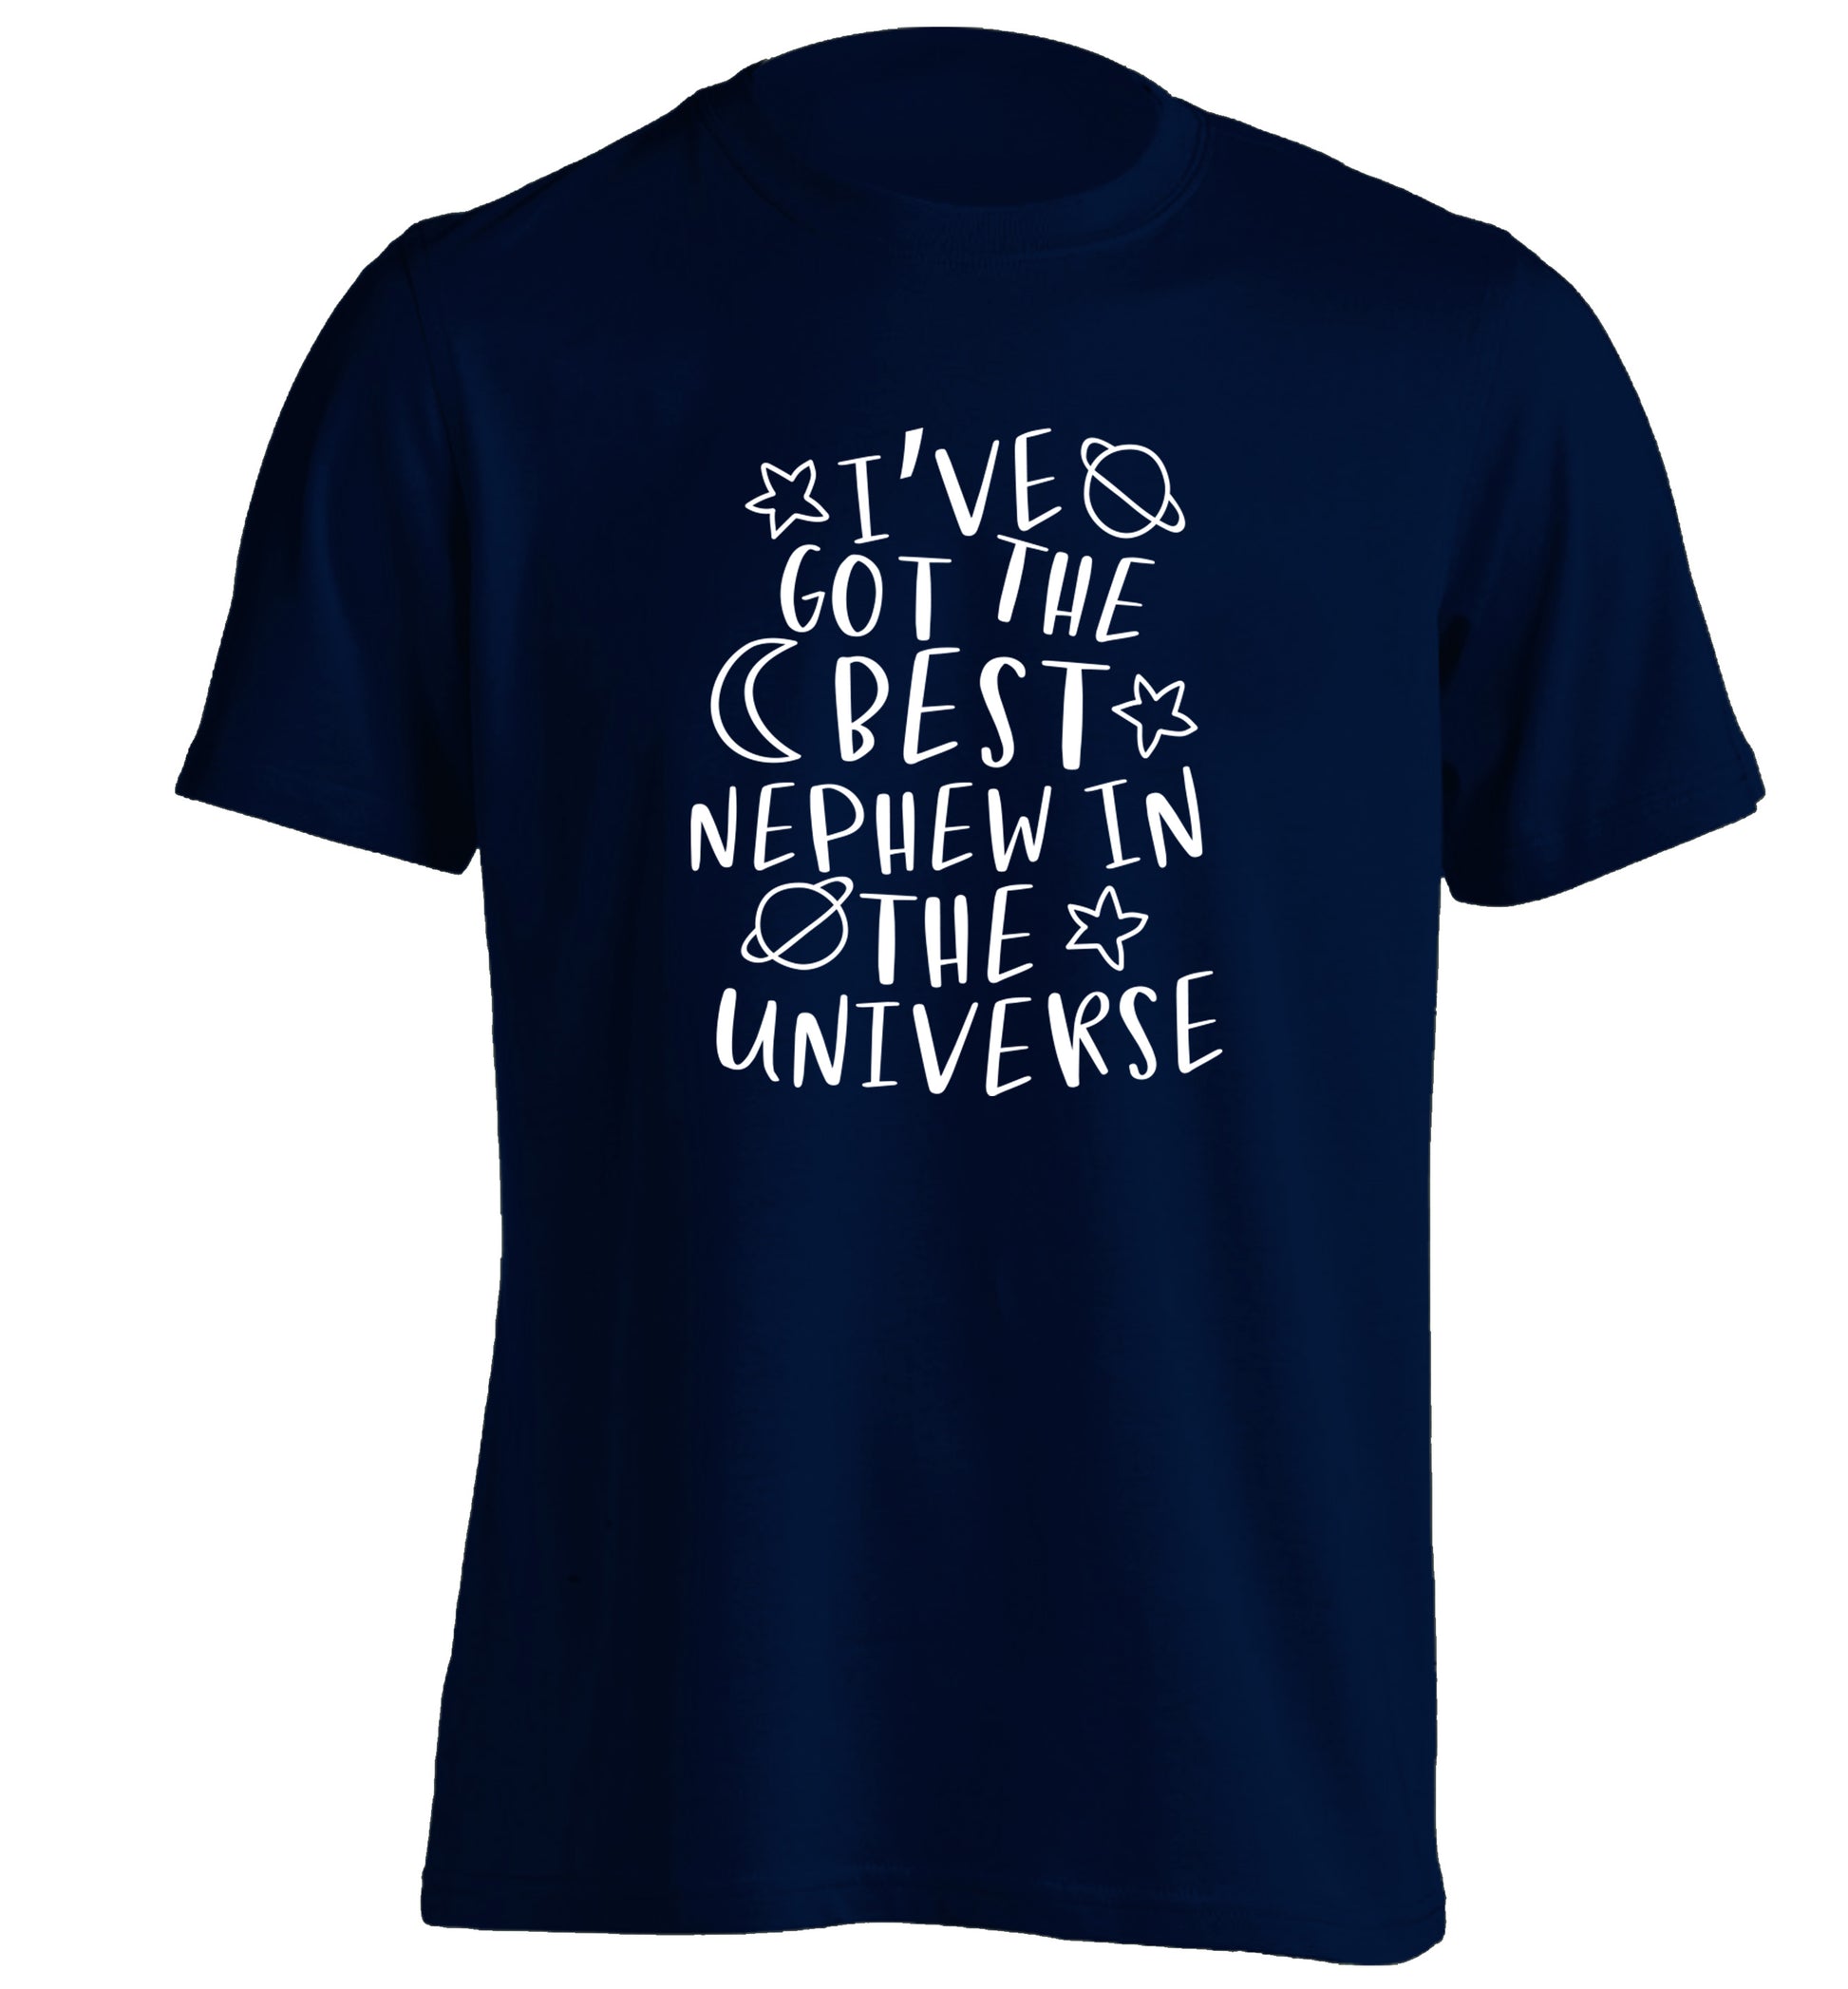 I've got the best nephew in the universe adults unisex navy Tshirt 2XL